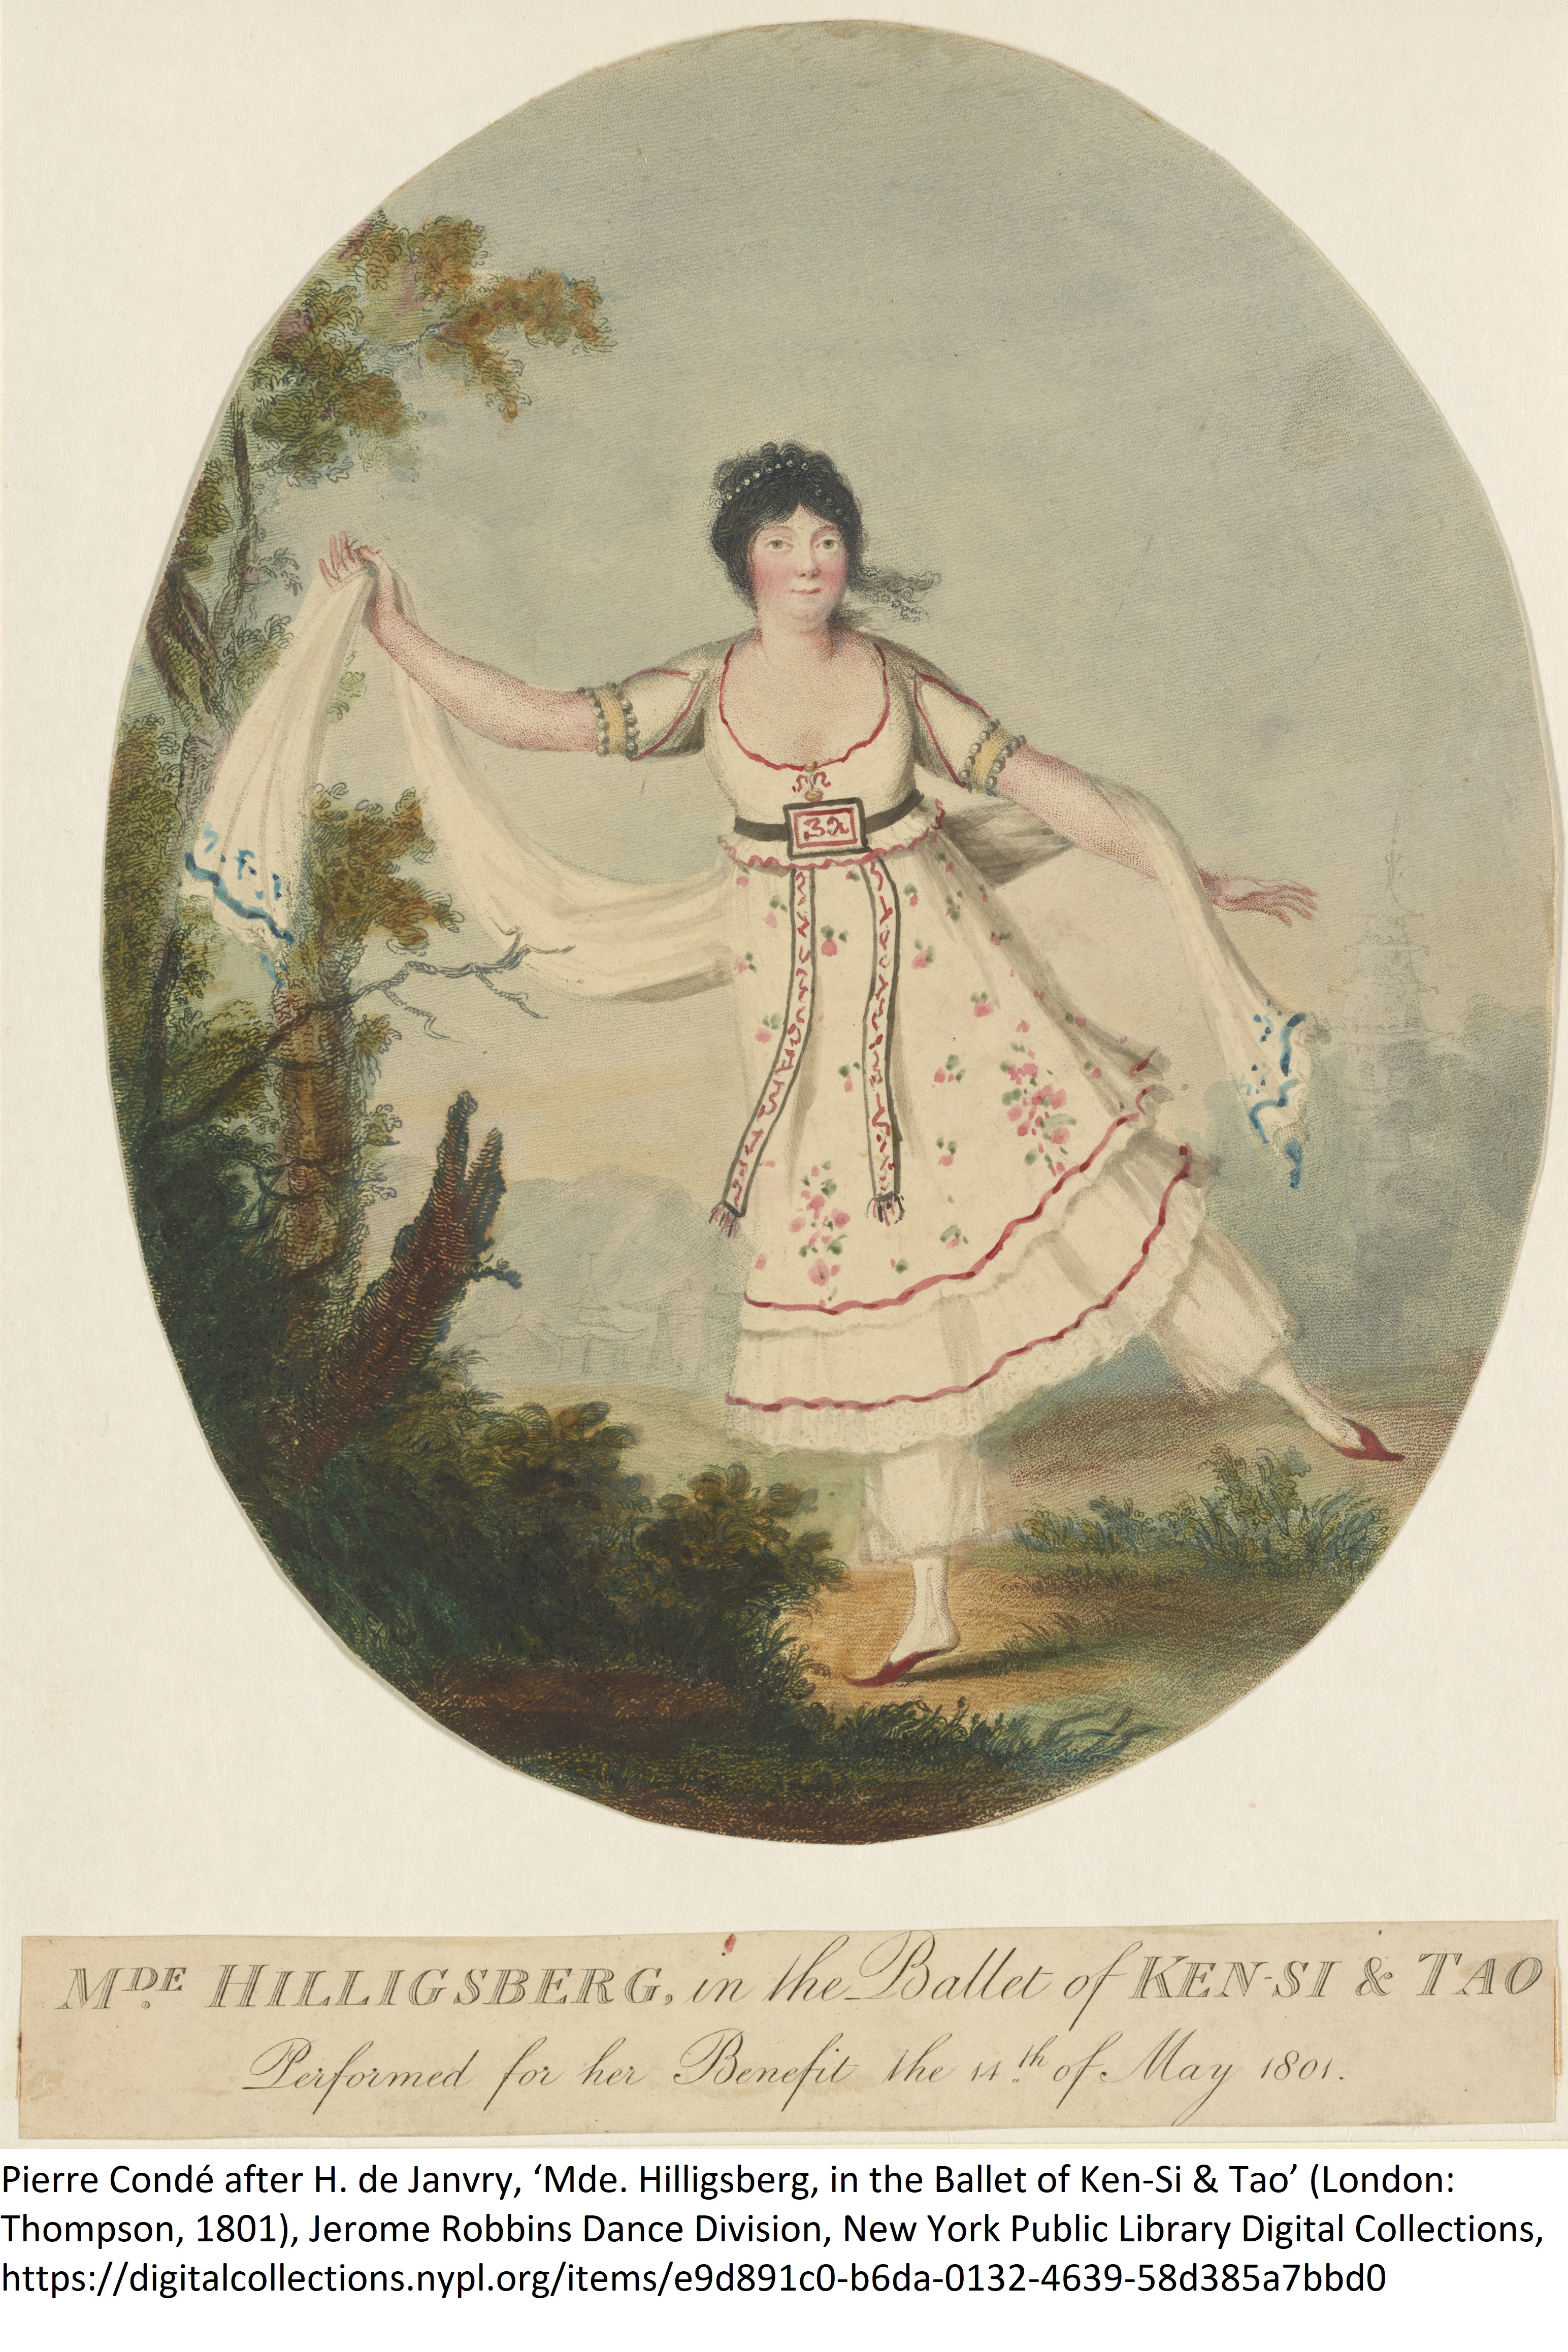 Pierre Condé after H. de Janvry, ‘Mde. Hilligsberg, in the Ballet of Ken-Si & Tao’ (London: Thompson, 1801), Jerome Robbins Dance Division, New York Public Library Digital Collections, https://digitalcollections.nypl.org/items/e9d891c0-b6da-0132-4639-58d385a7bbd0 